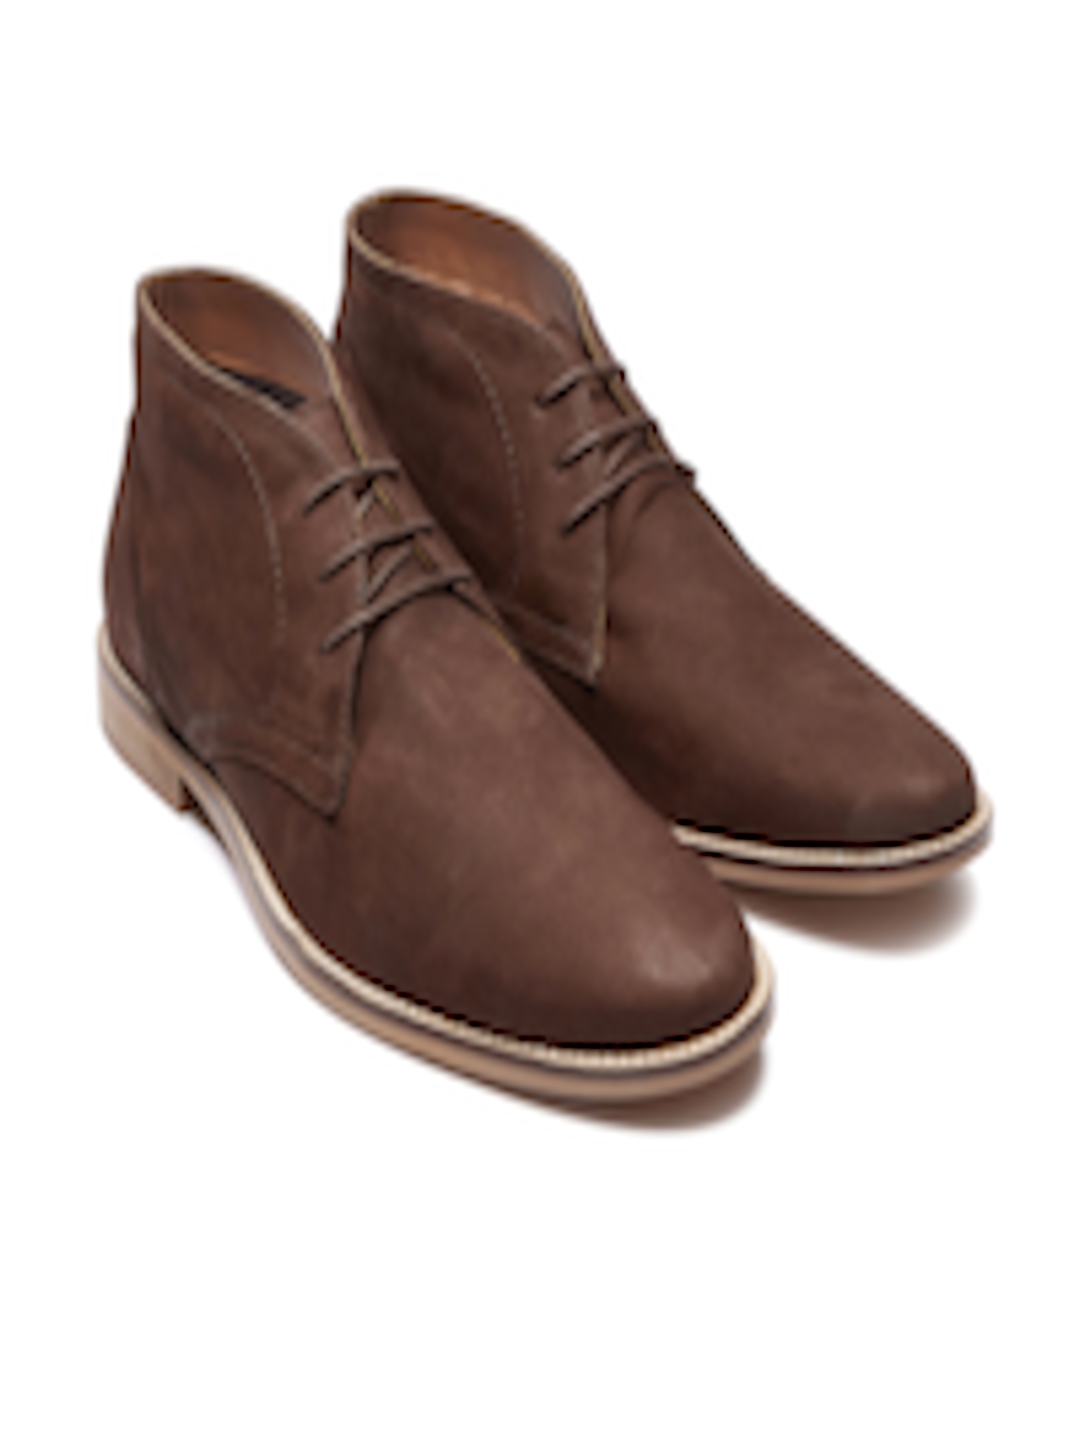 Buy Next Men Brown Solid Genuine Leather Chukka Boots - Casual Shoes ...